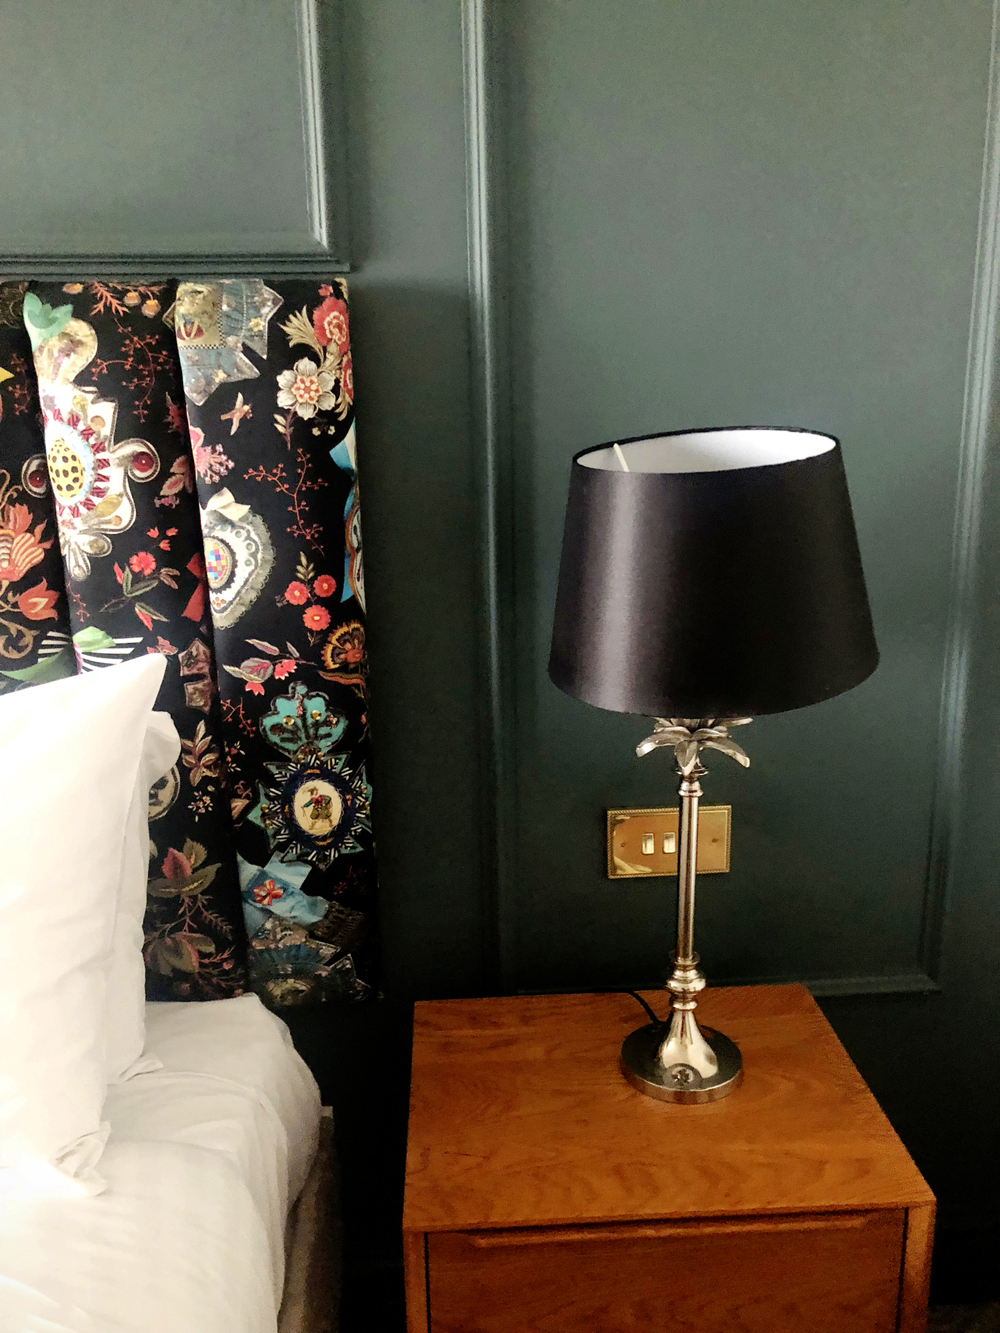 Rump and Wade and Cromwell Hotel review - minibreak gastro staycation in Stevenage, Hertfordshire